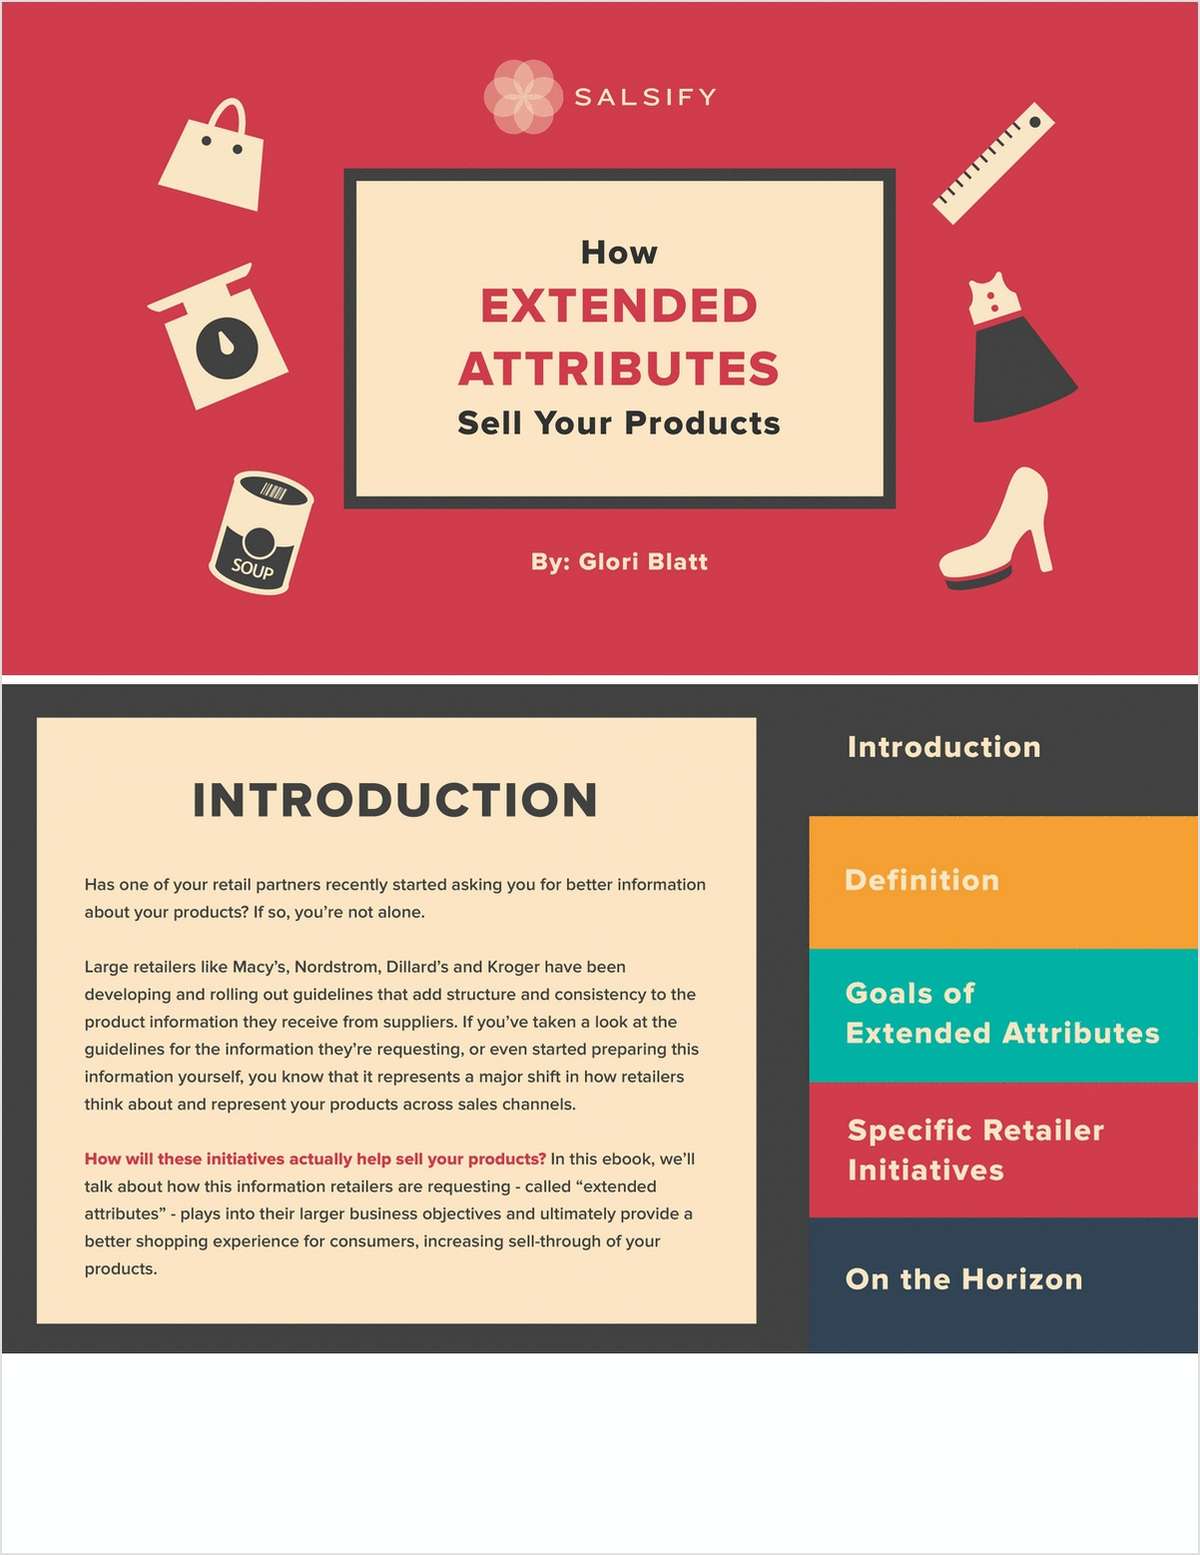 How Extended Attributes Sell More Products Online